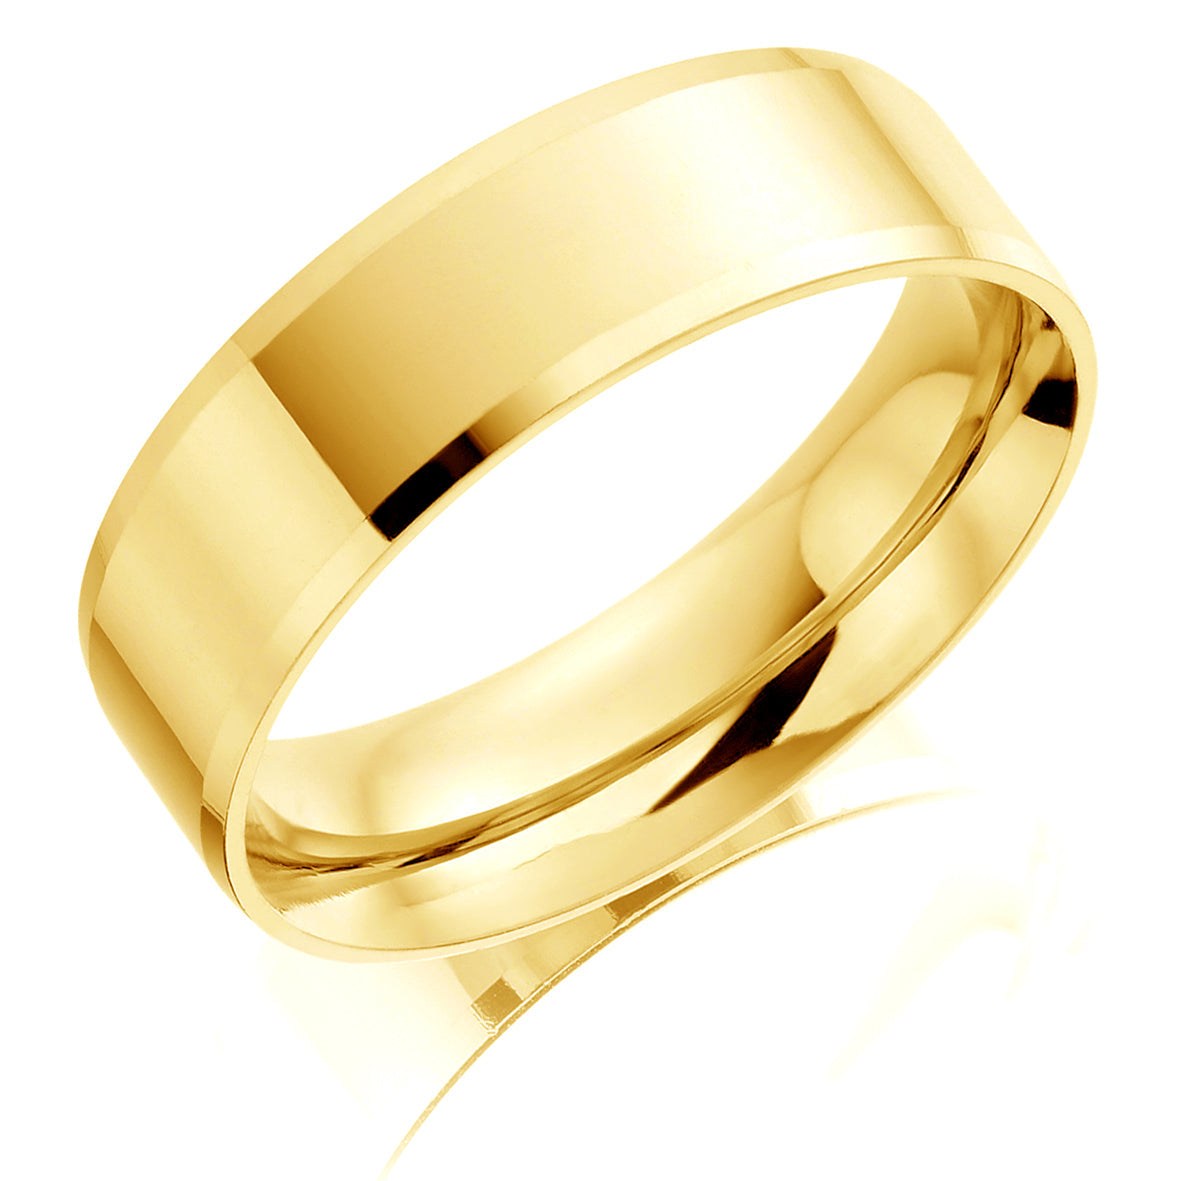 Men's 9ct Yellow and White Gold 6mm Wedding Ring